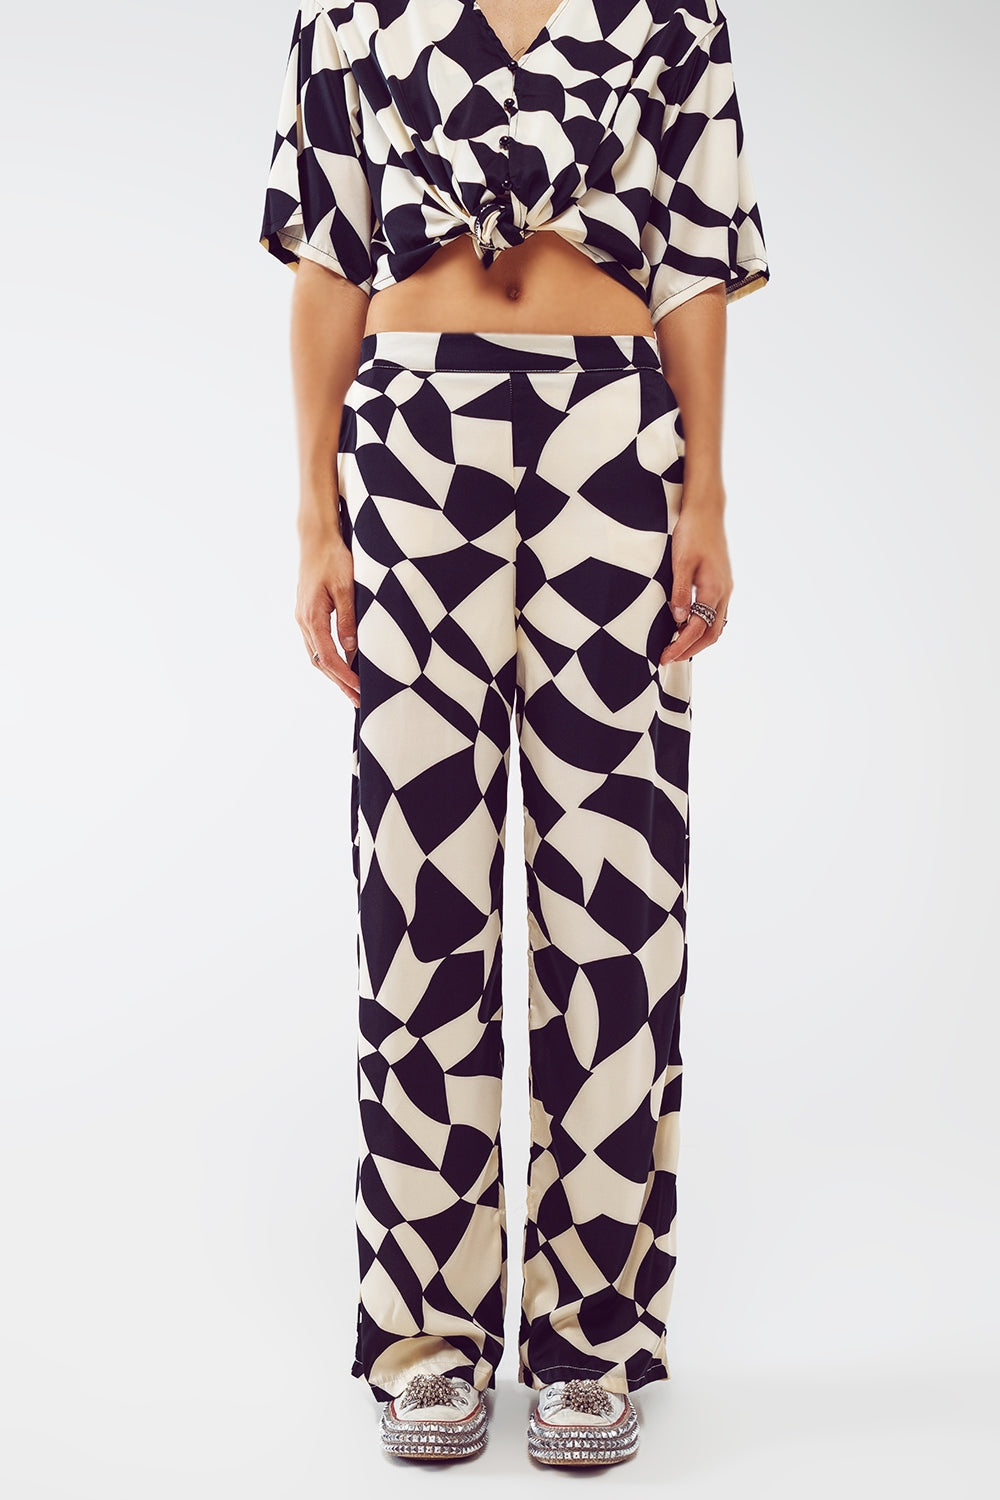 Q2 Straight Pants With Bauhaus Abstract Black and White Print